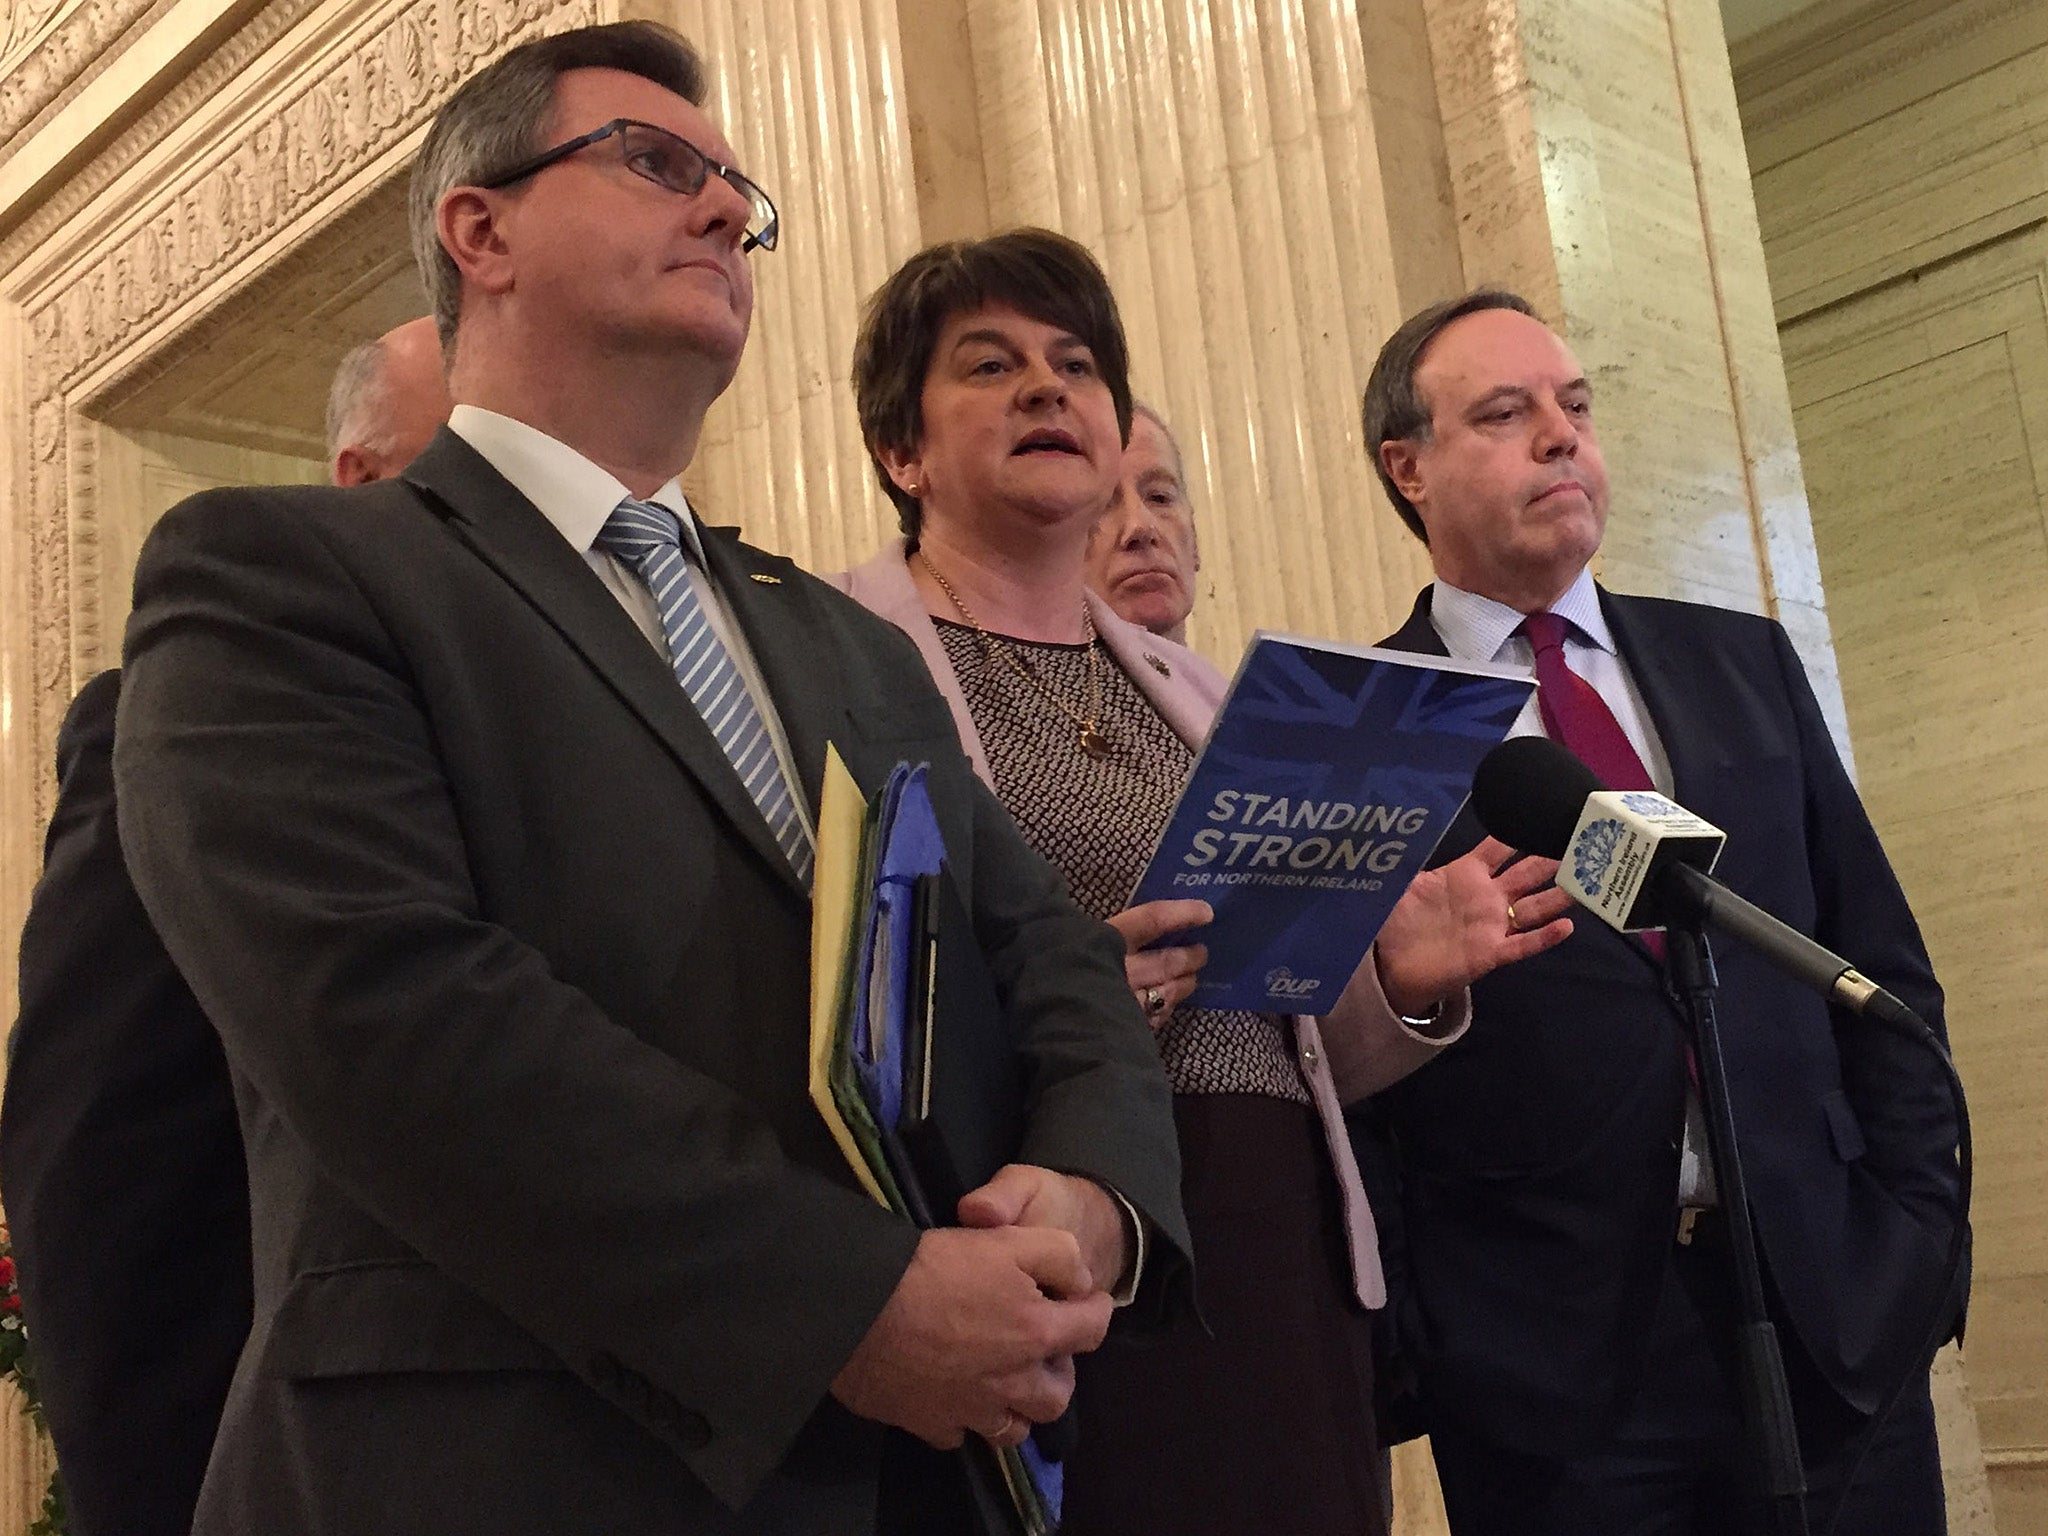 The DUP do not represent the majority who wish to remain